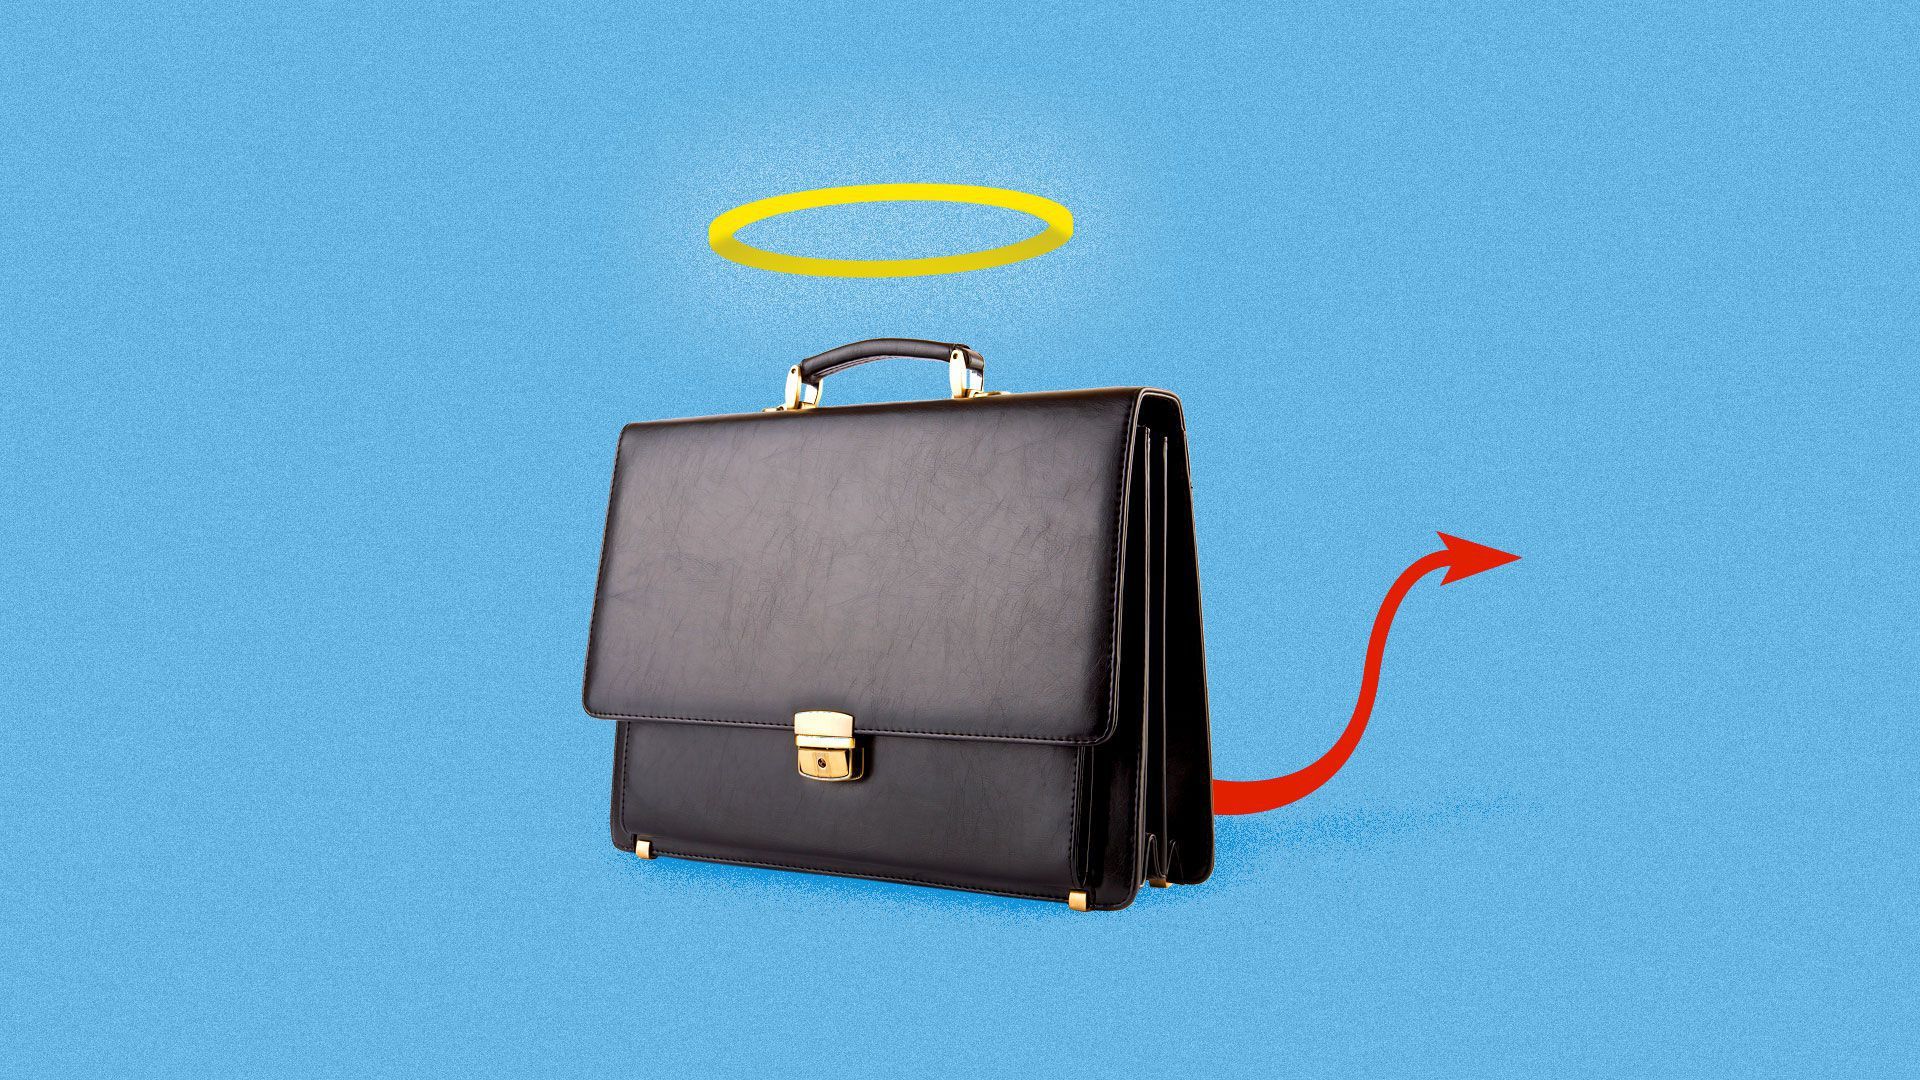 A briefcase with a halo and a devil's tail